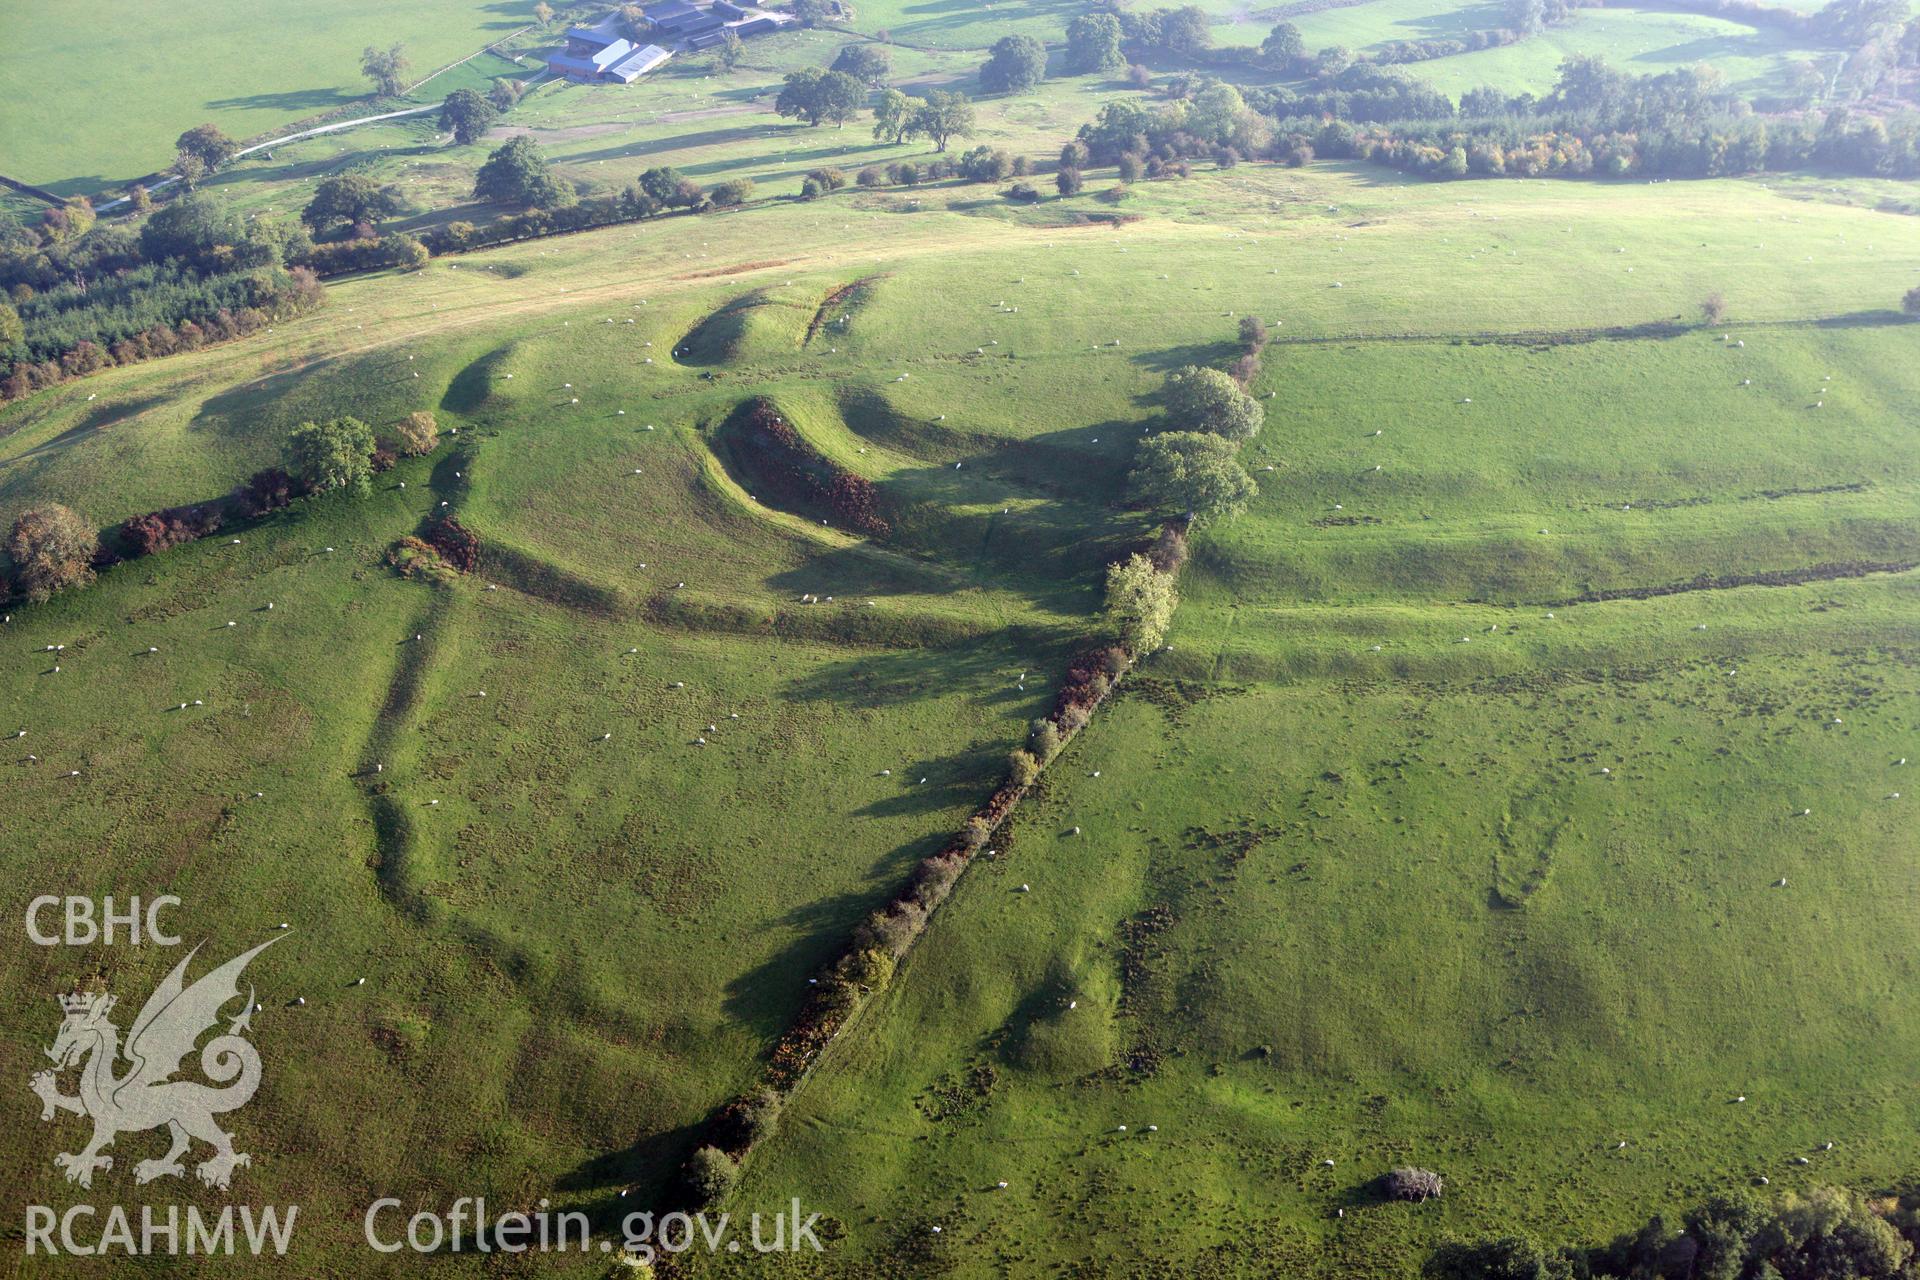 RCAHMW colour oblique photograph of Cefn Carnedd Hillfort, near Caersws. Taken by Toby Driver on 13/10/2010.